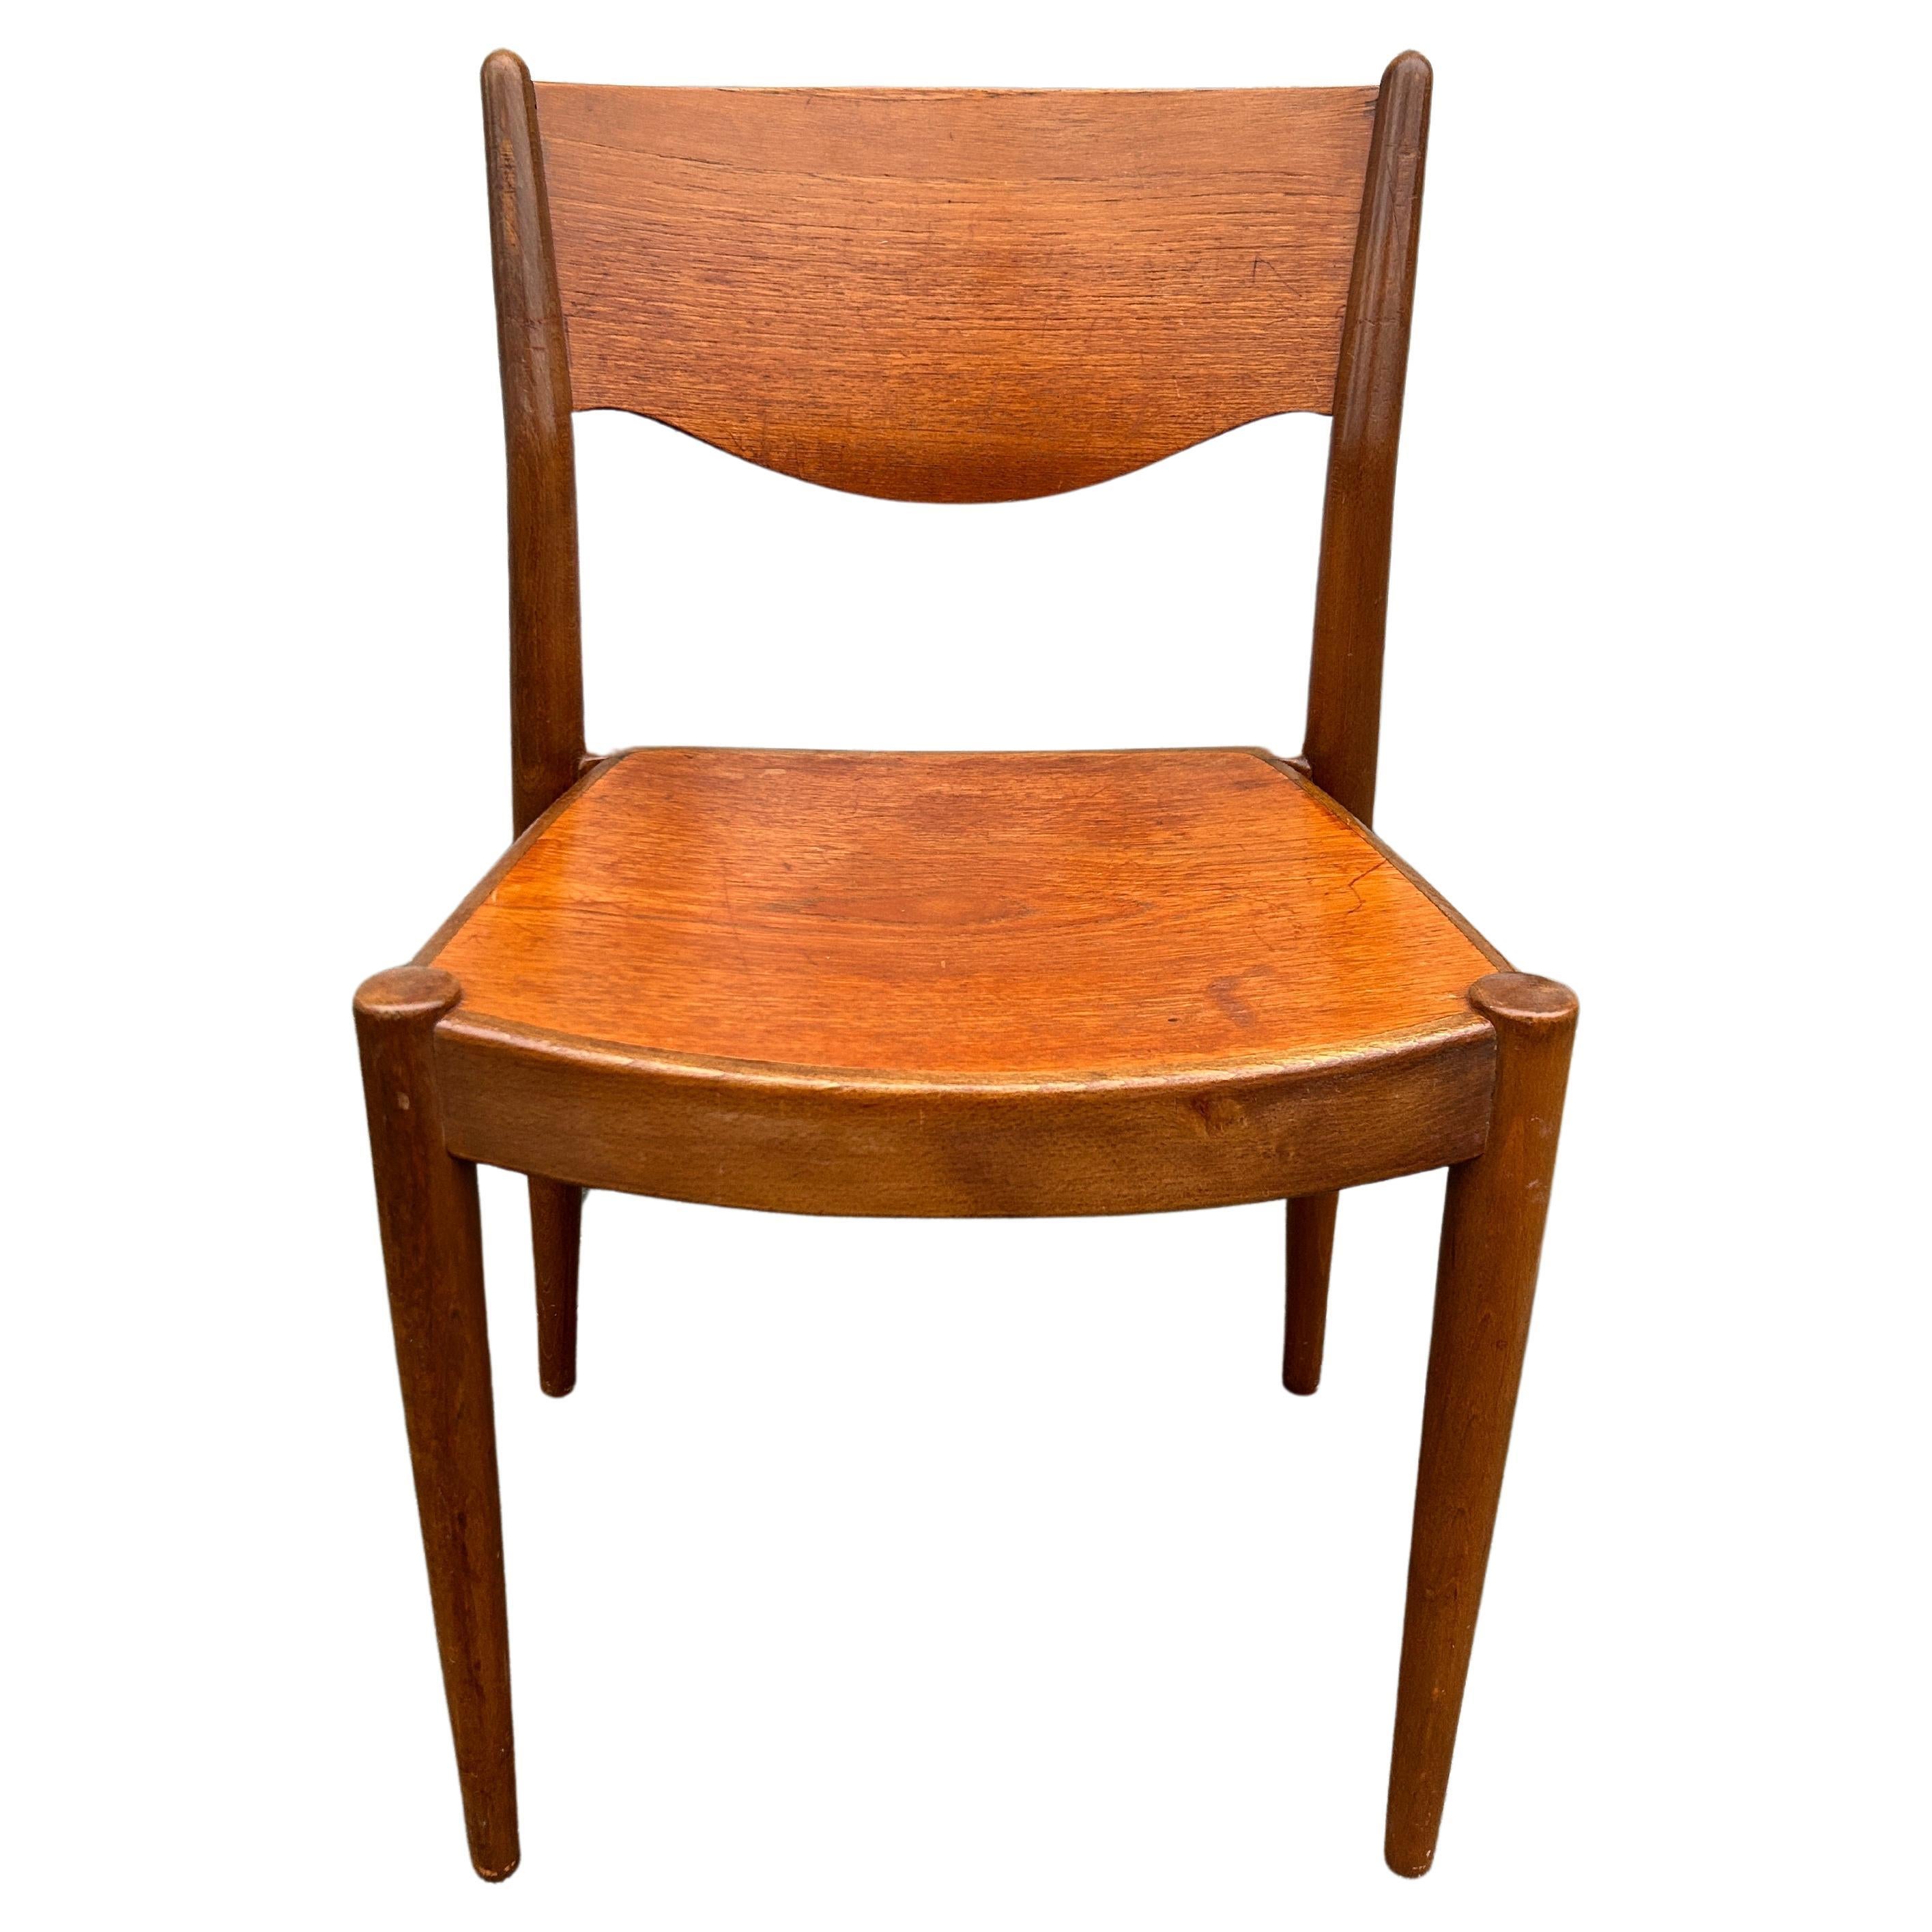 Mid-20th Century 4 Borge Mogensen Stacking Danish Teak Dining Chairs for C.M. Madsen For Sale